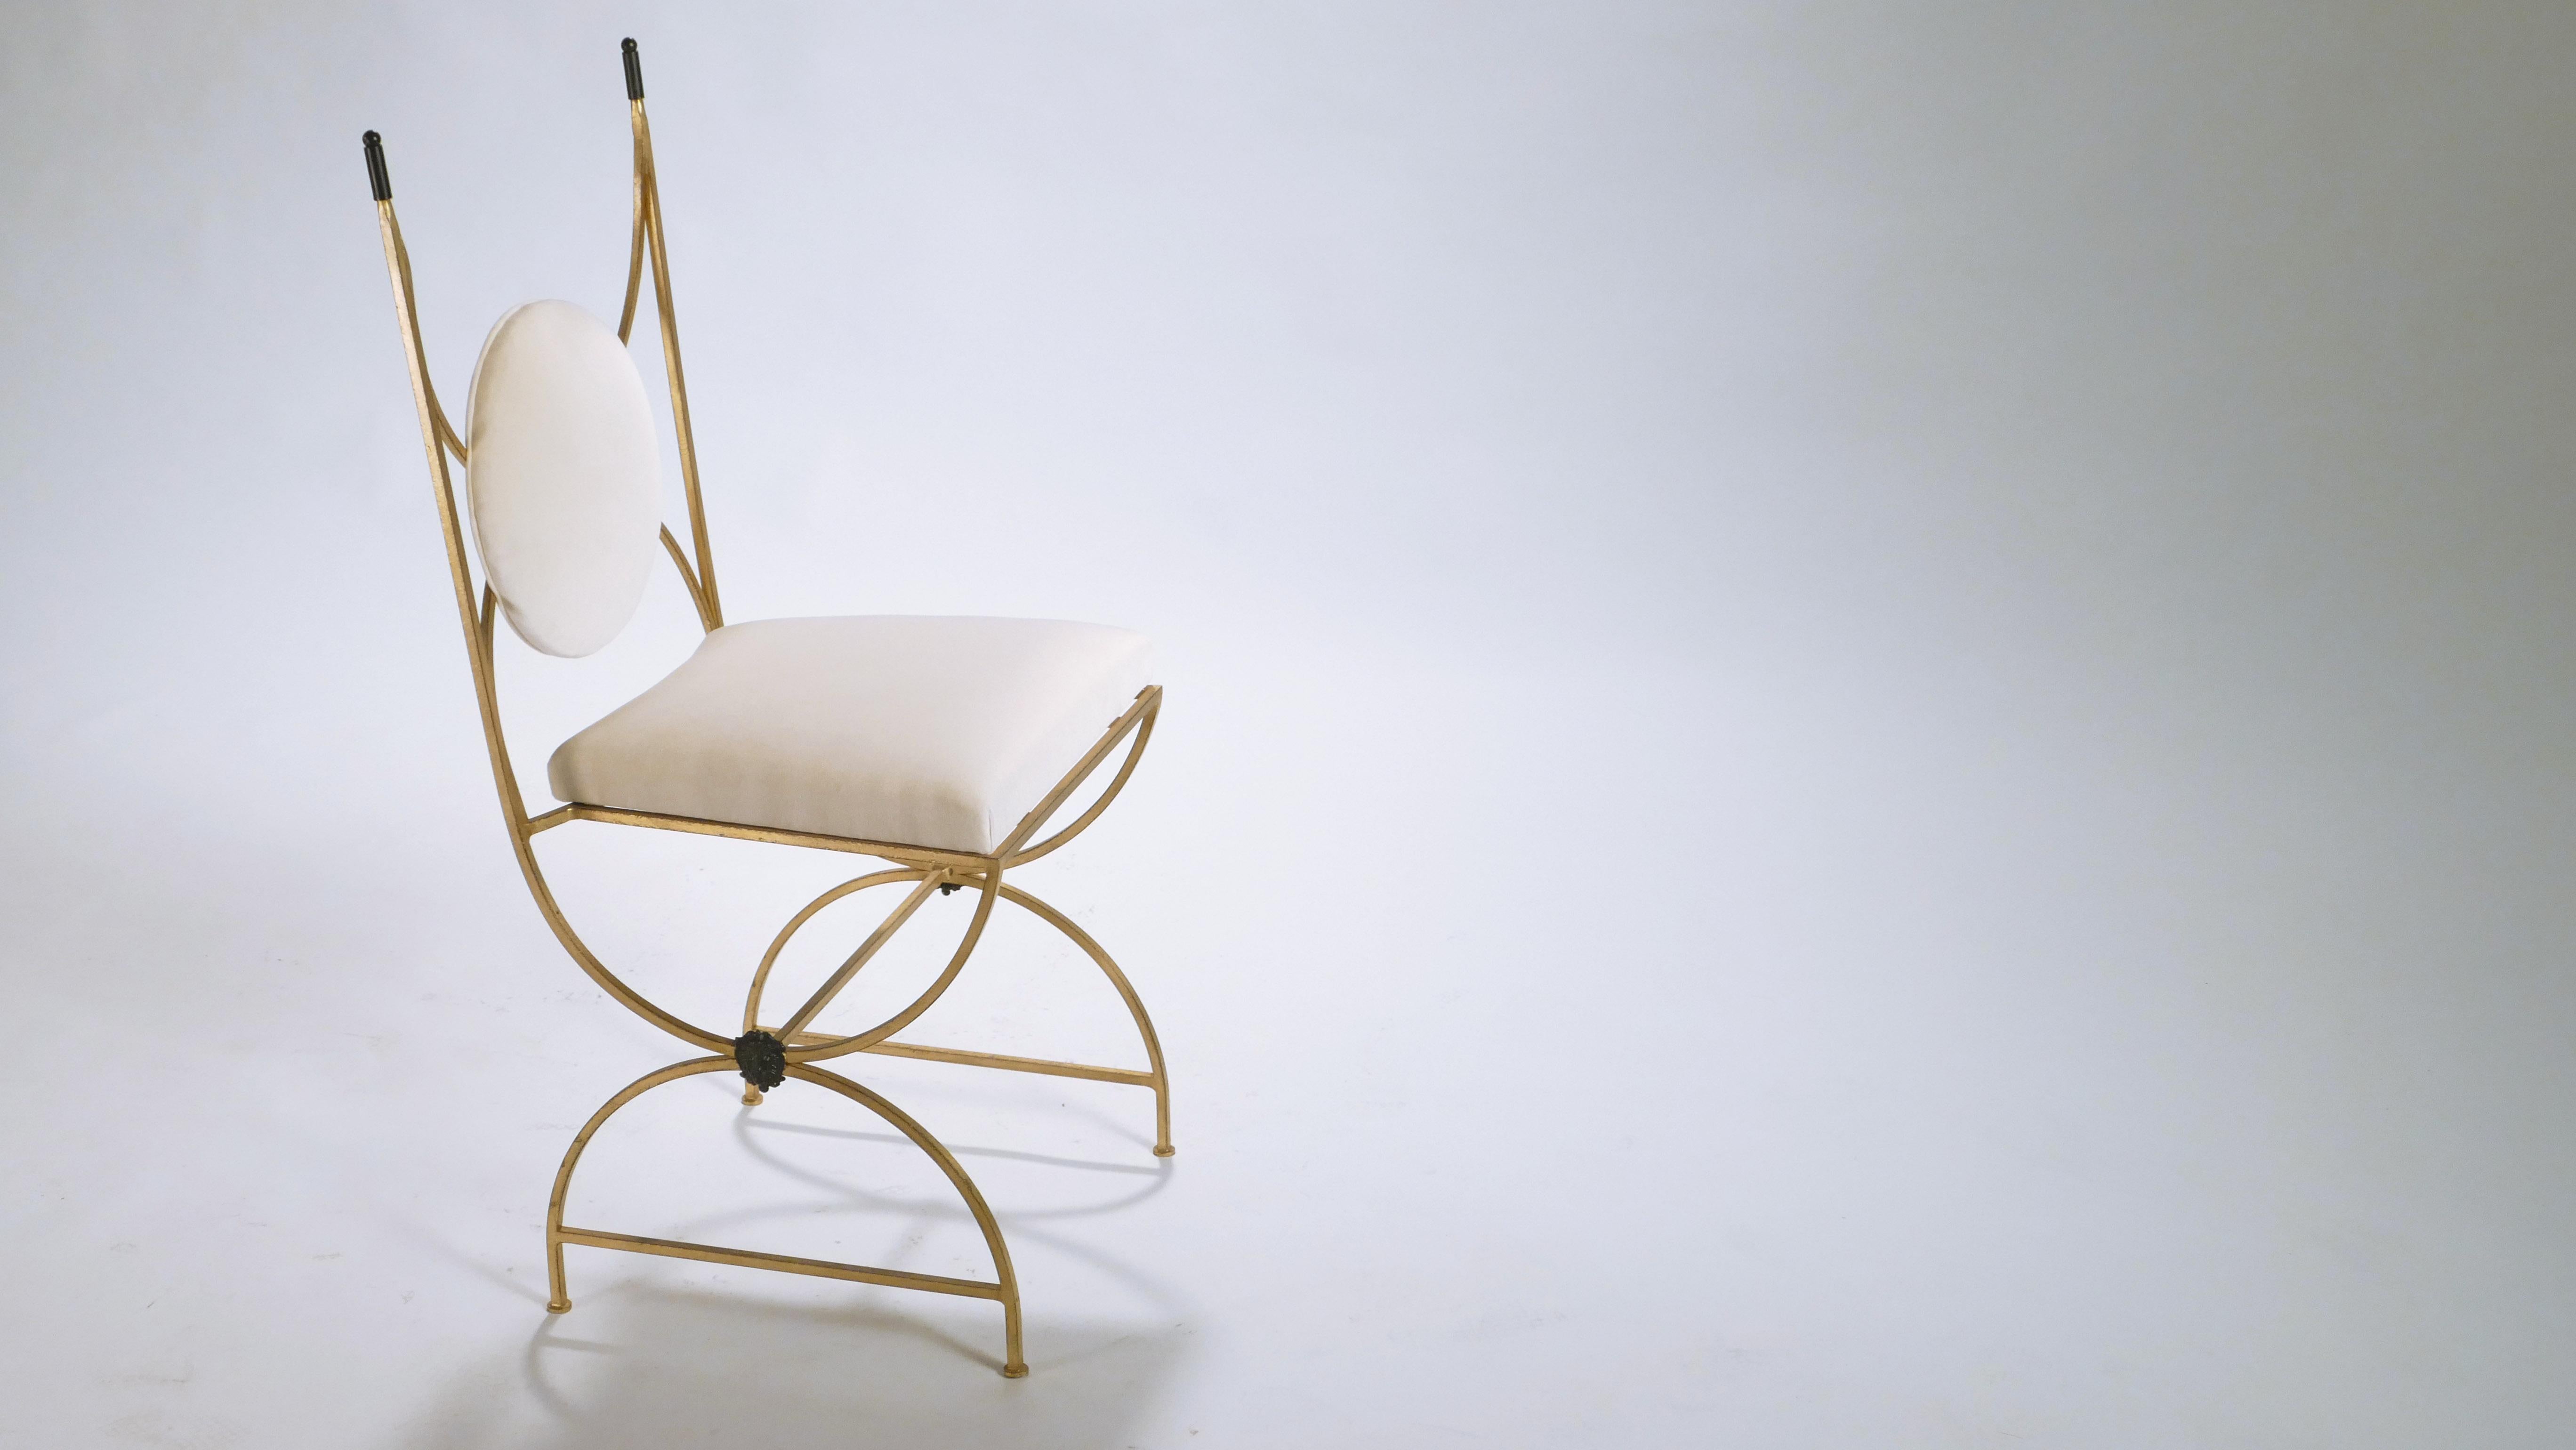 French Set of Four Midcentury Chairs Gold Leaf and Velvet by Robert Thibier, 1960s